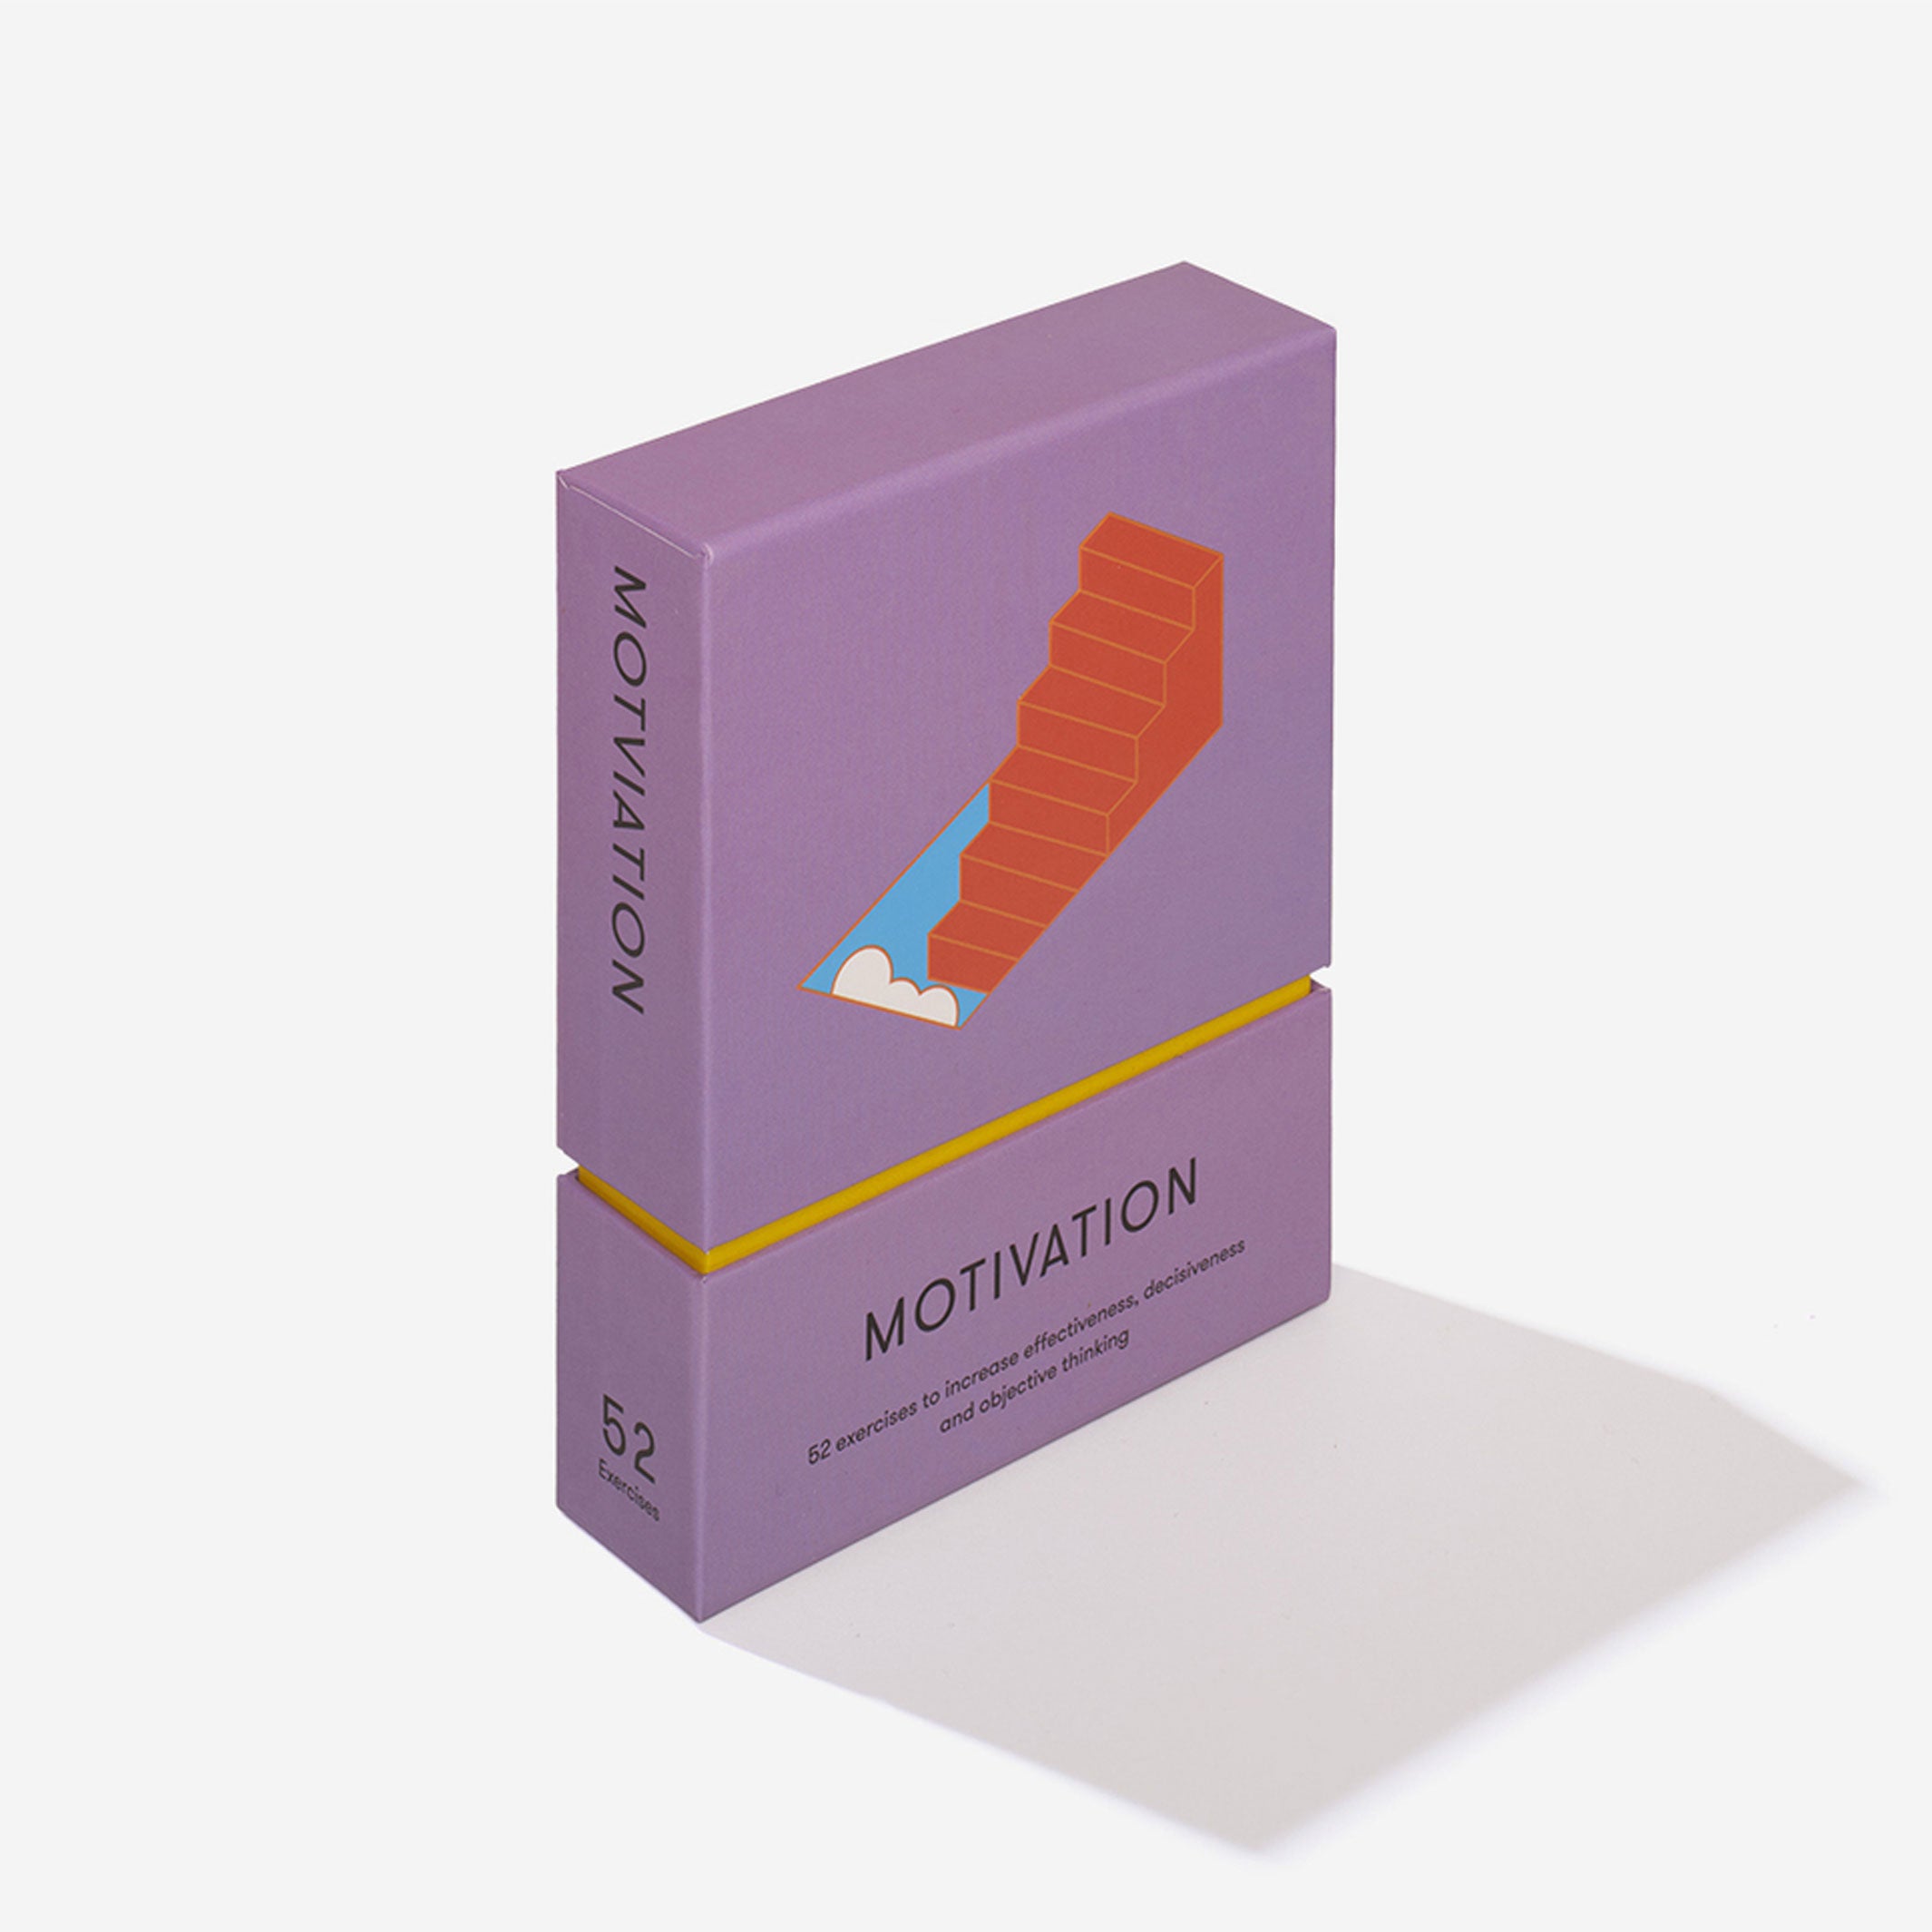 MOTIVATION CARD SET | Promotion v. MOTIVATION | 52 exercices d'anglais | The School of Life